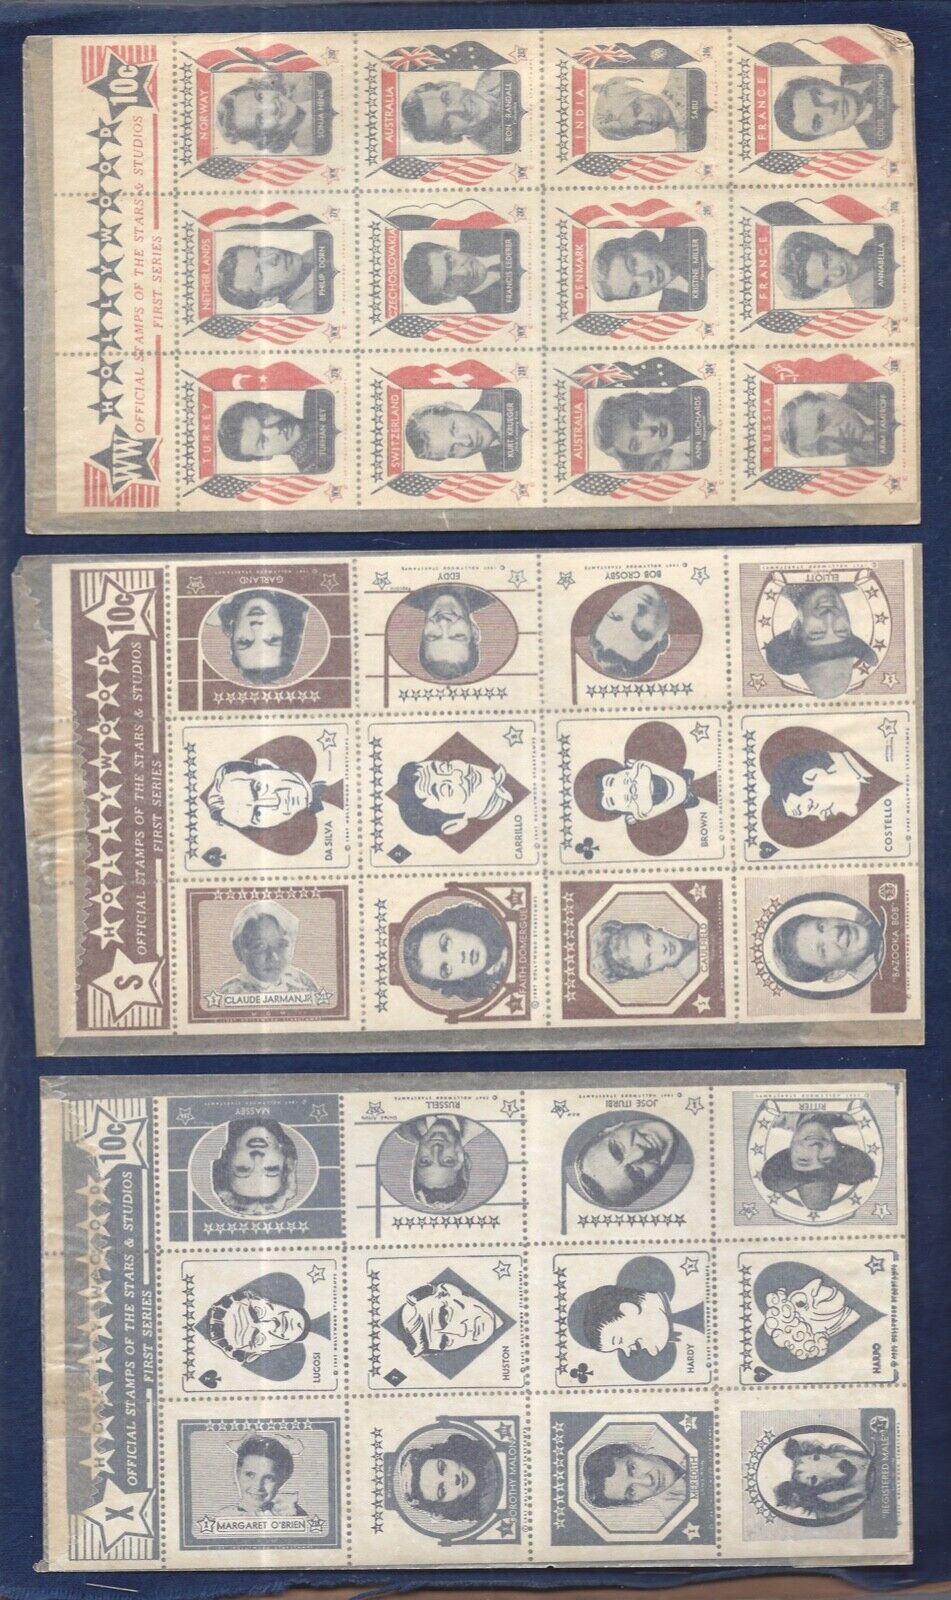 LQQK VINTAGE 1947 ORIGINAL FIRST SERIES STAMPS OF THE STARS SEALED UNOPENED X28